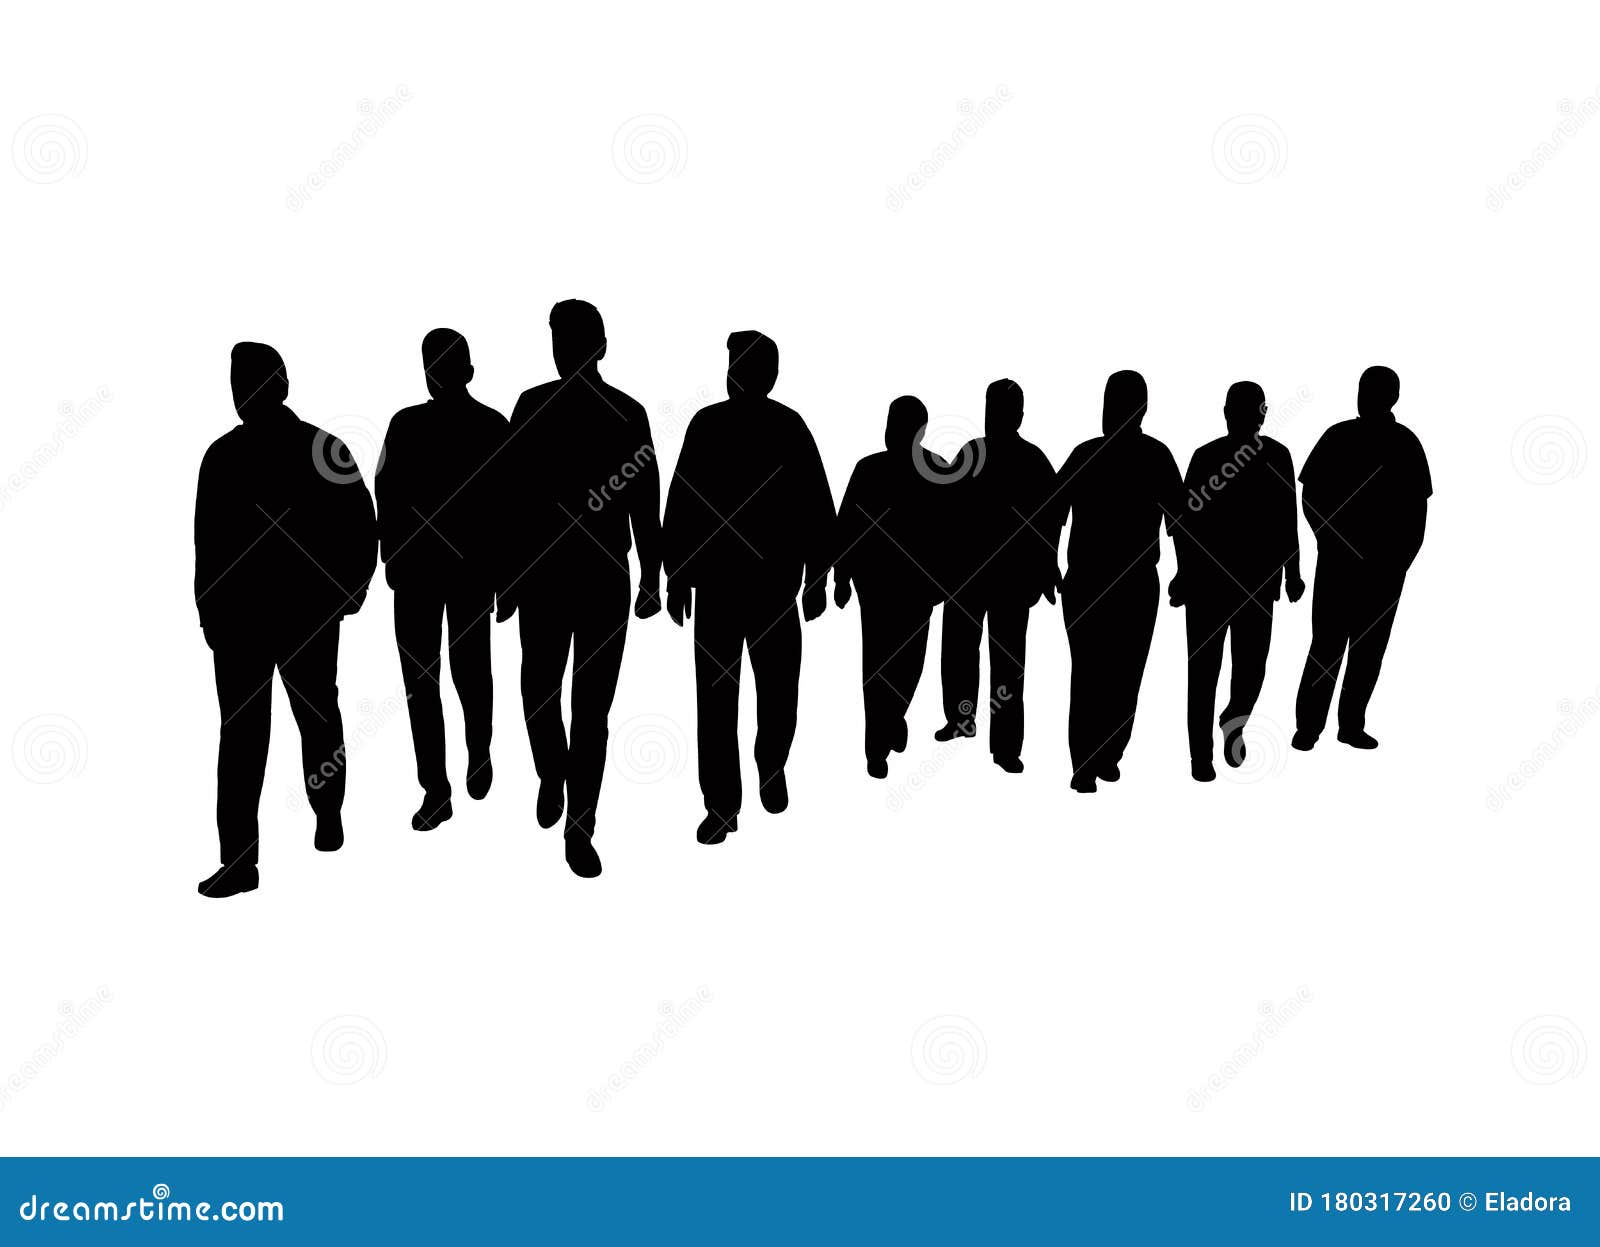 Many Men Together, Body Silhouette Vector Stock Vector - Illustration ...